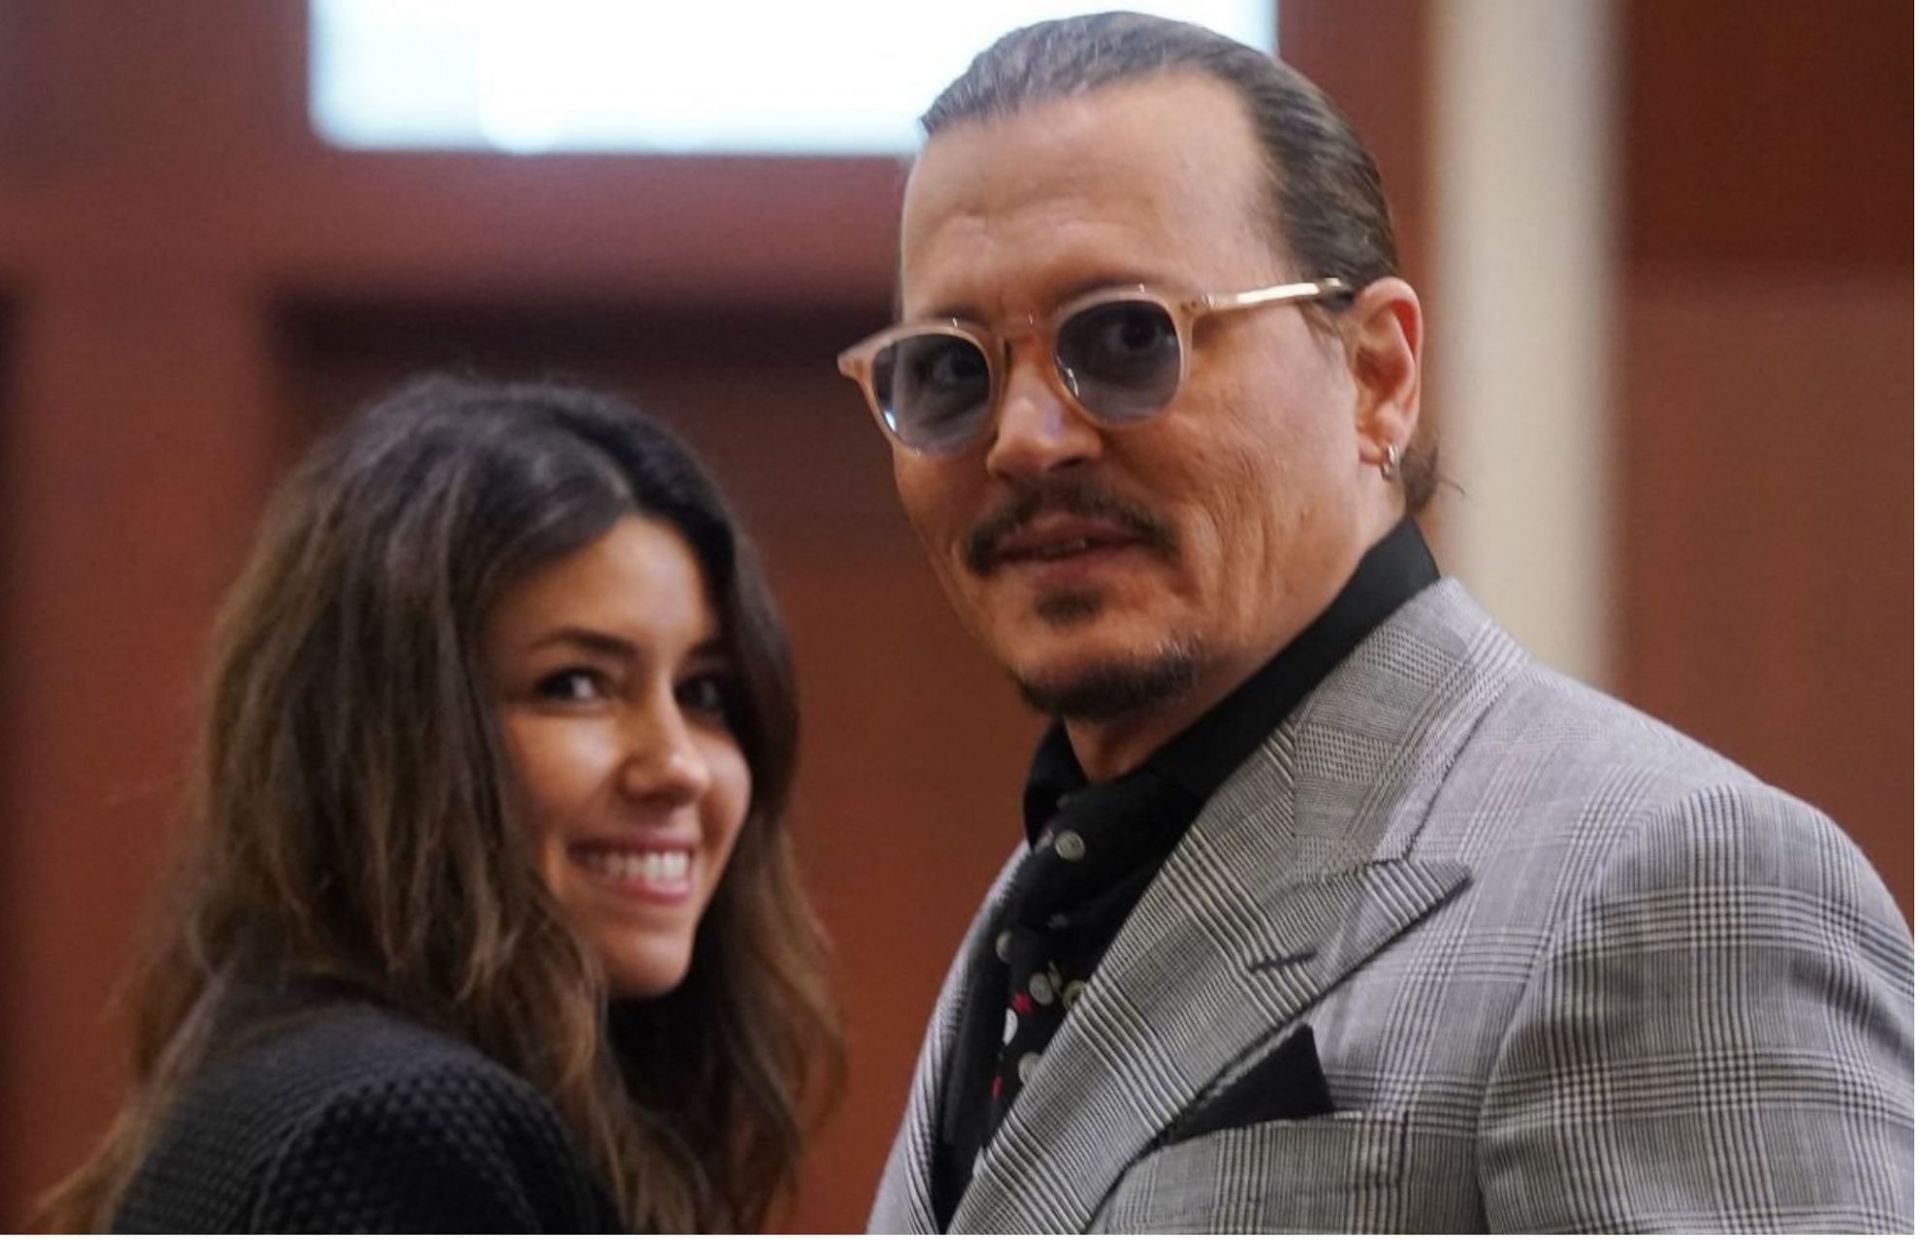 Camille Vasquez shared that her boyfriend was never conscious about Johnny Depp dating rumors (Image via Getty Images)